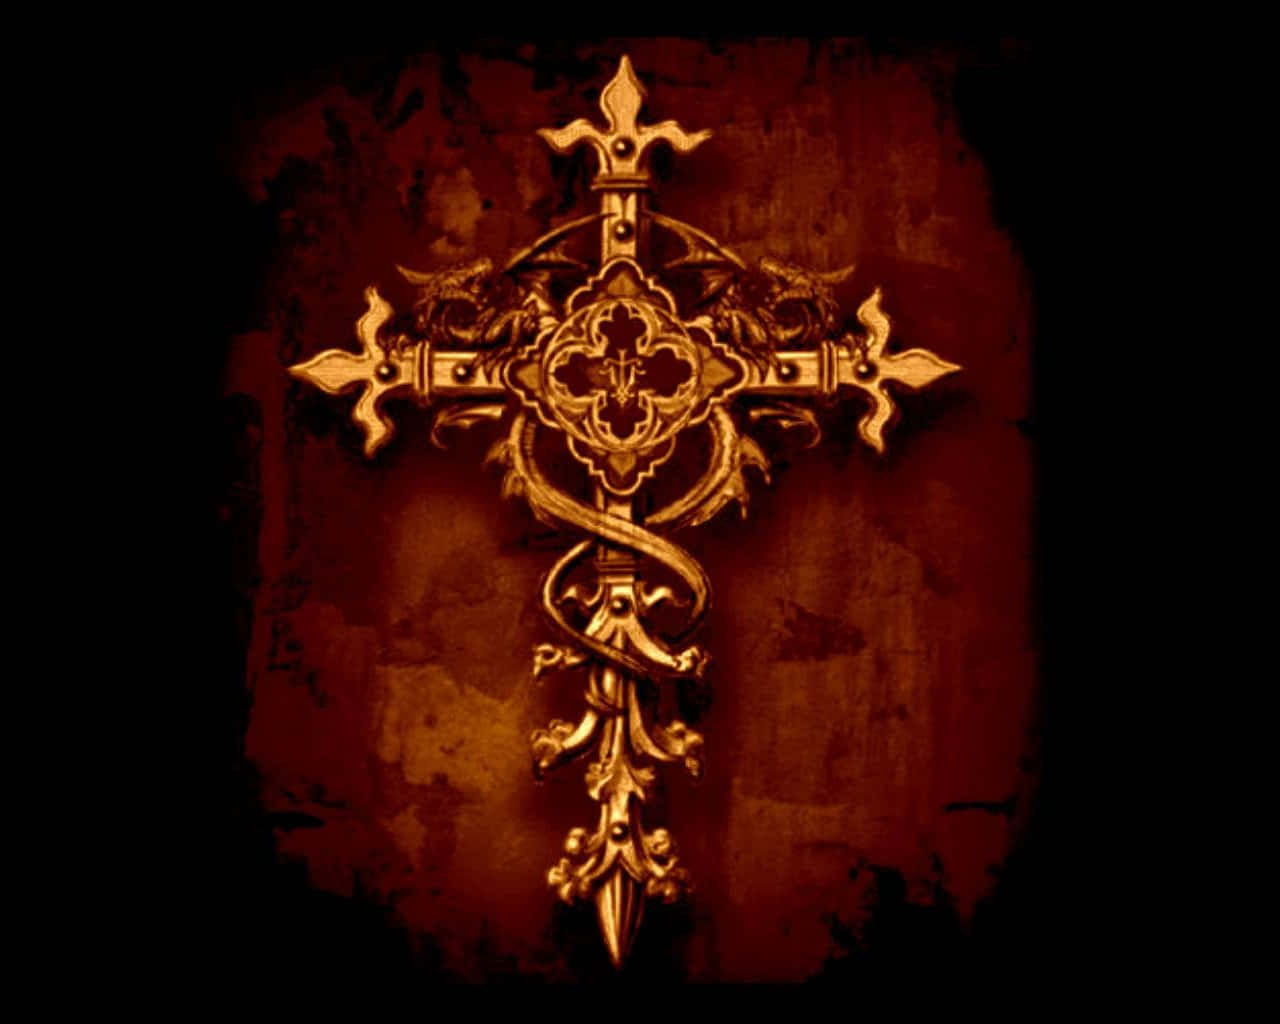 A beautiful Cute Cross depicting and symbolizing faith, hope and love. Wallpaper